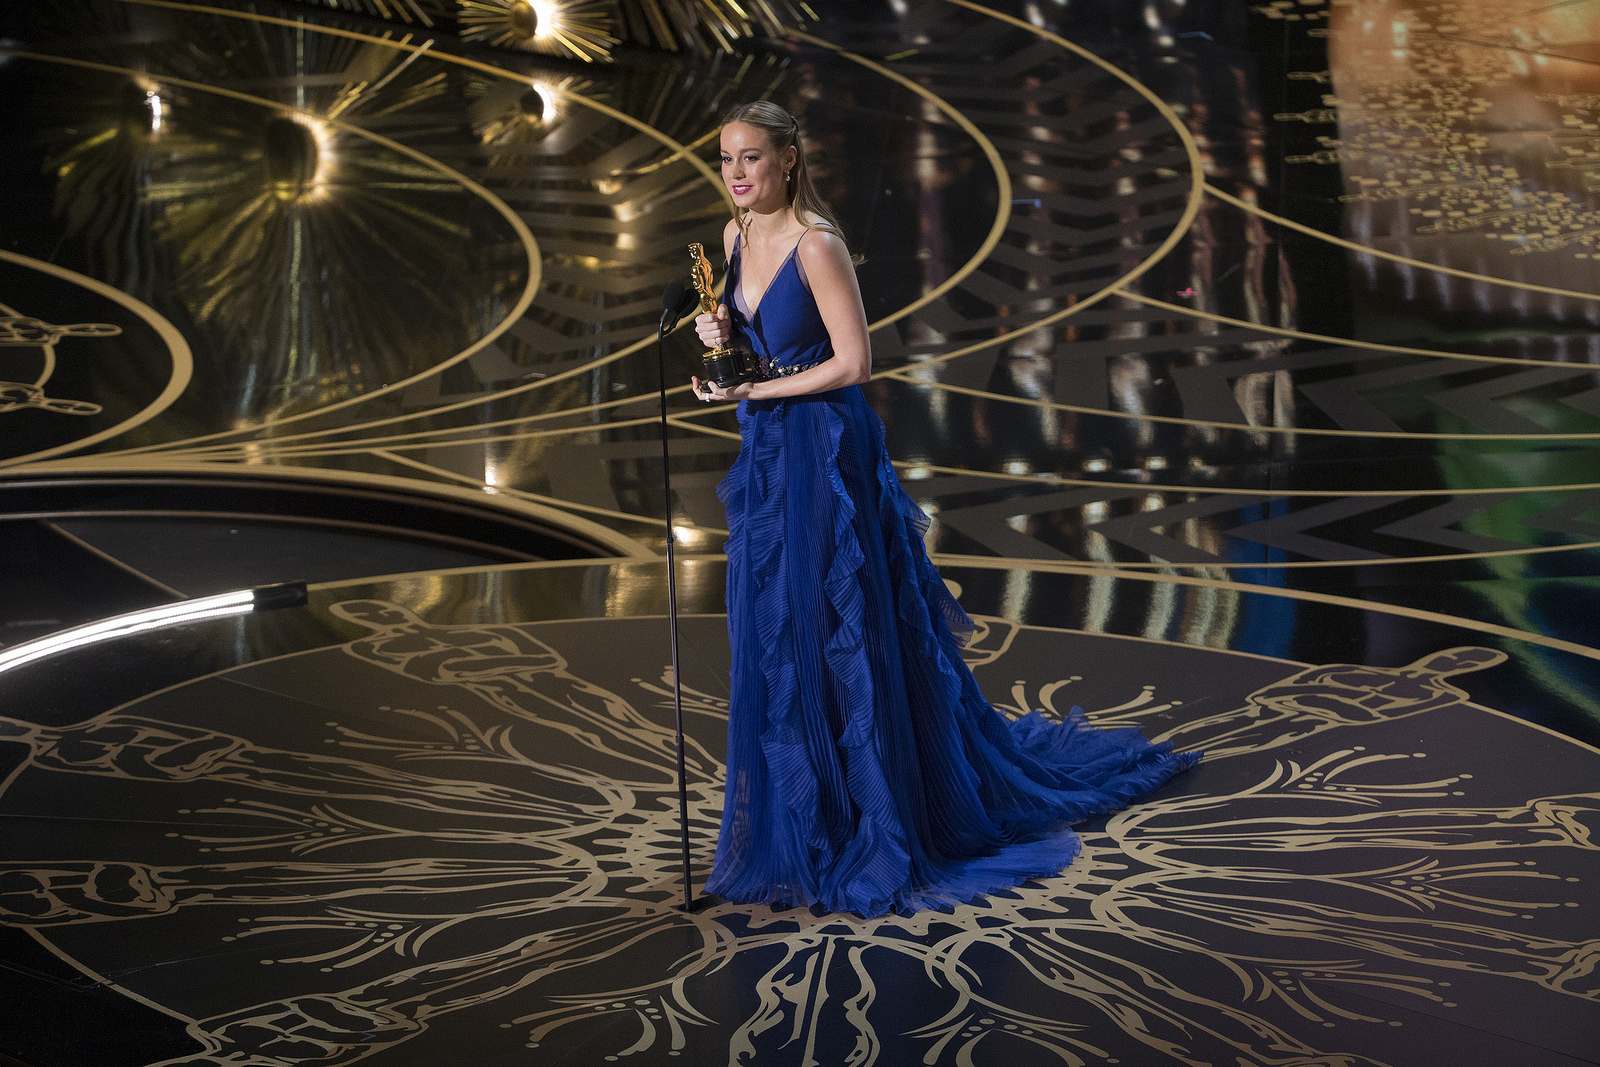 oscars 20163 The 88th Academy Awards Results